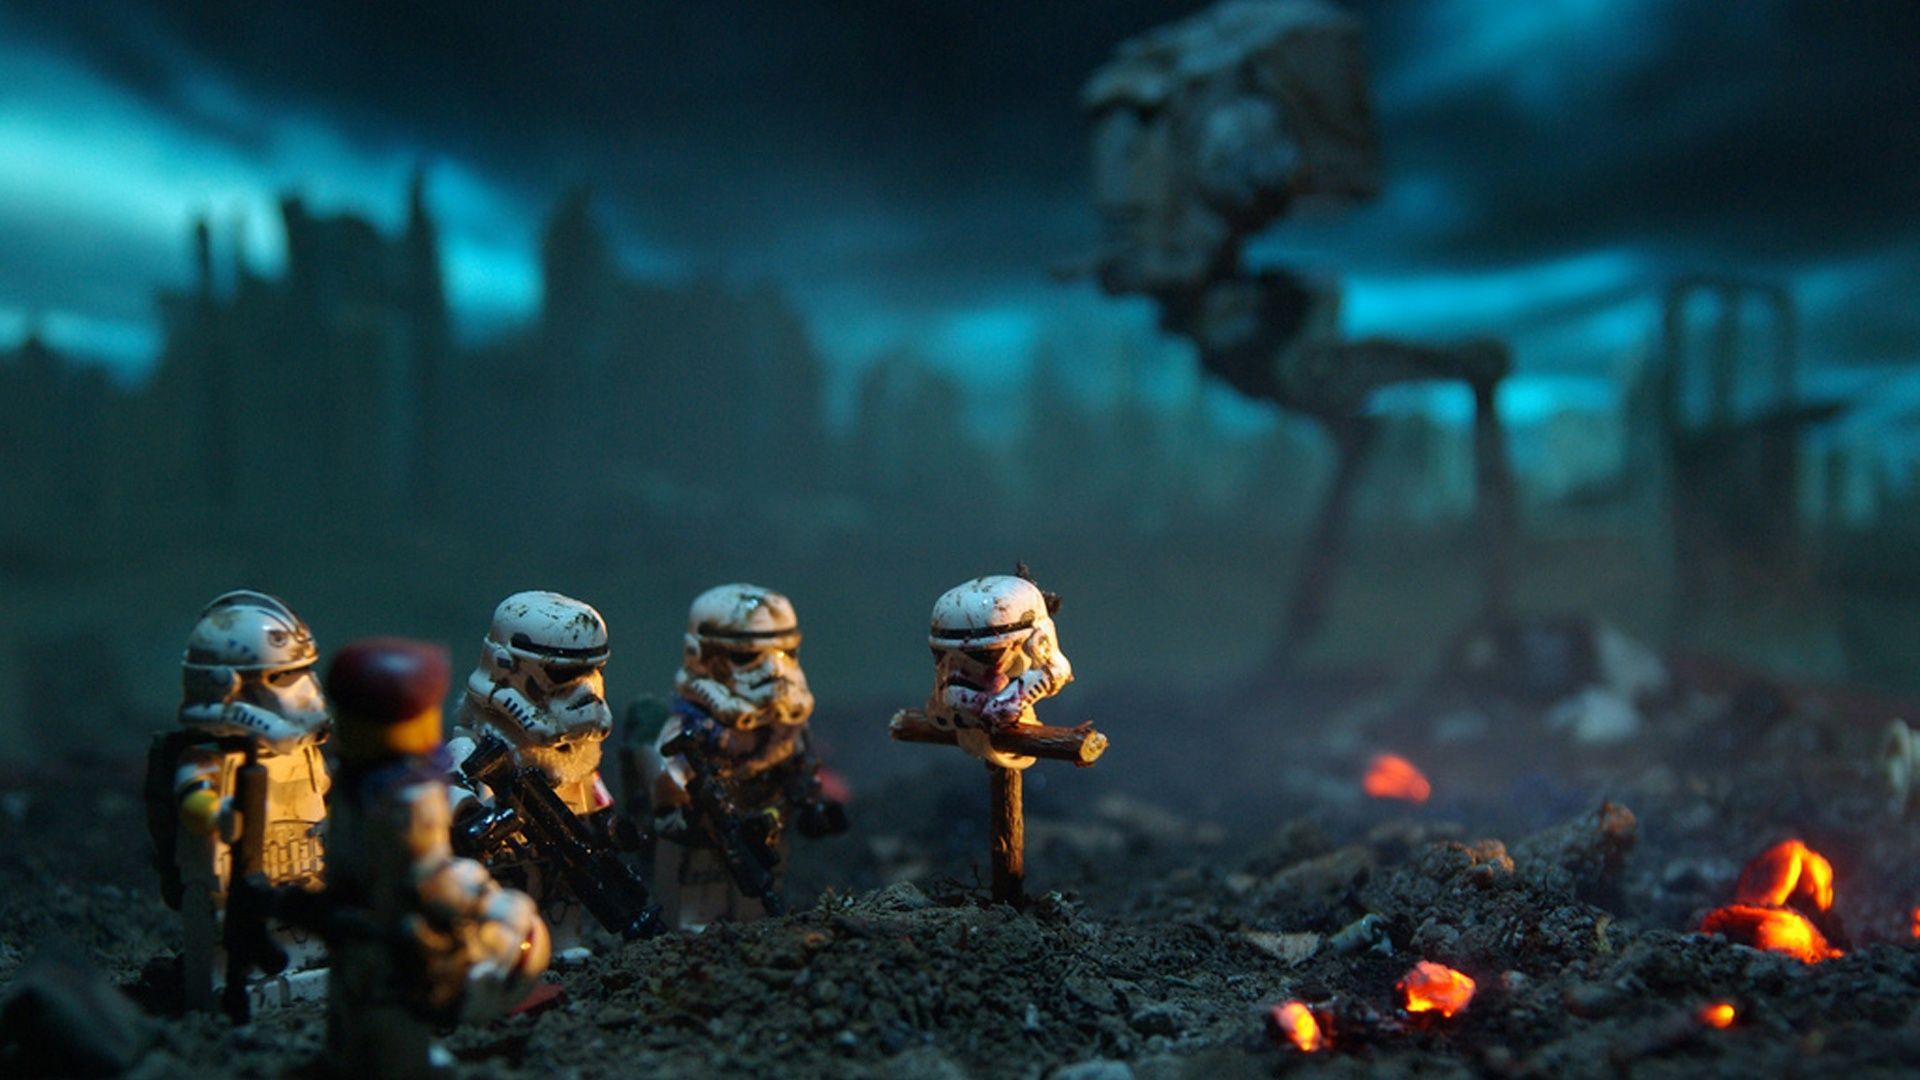 Lego Star Wars Stormtroopers Wallpapers | HD Wallpapers